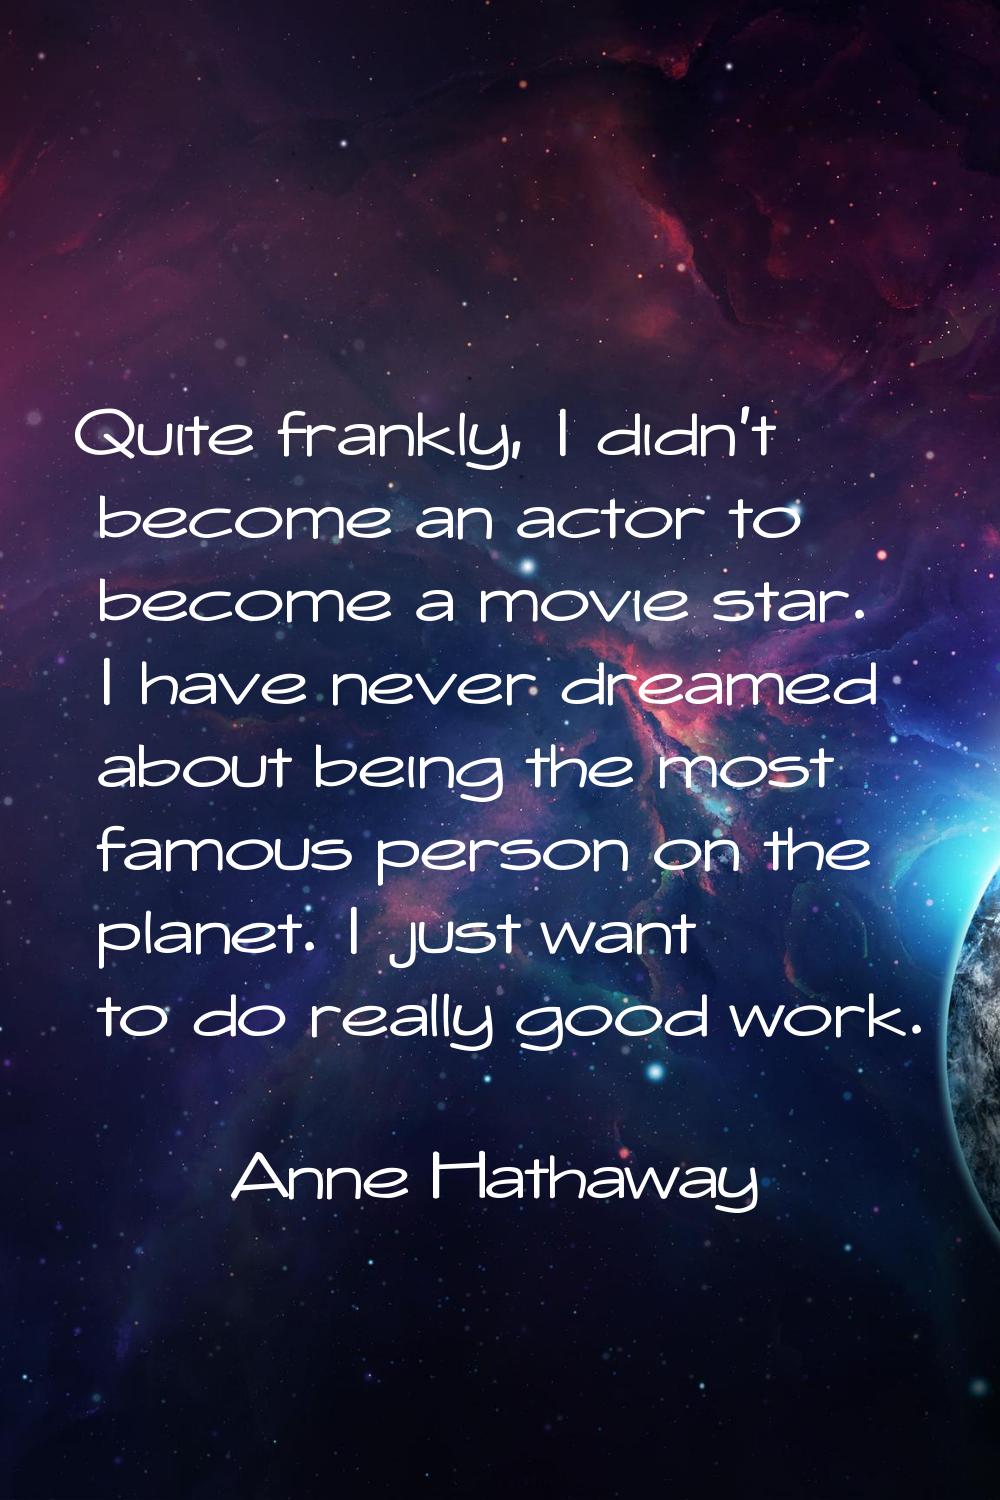 Quite frankly, I didn't become an actor to become a movie star. I have never dreamed about being th